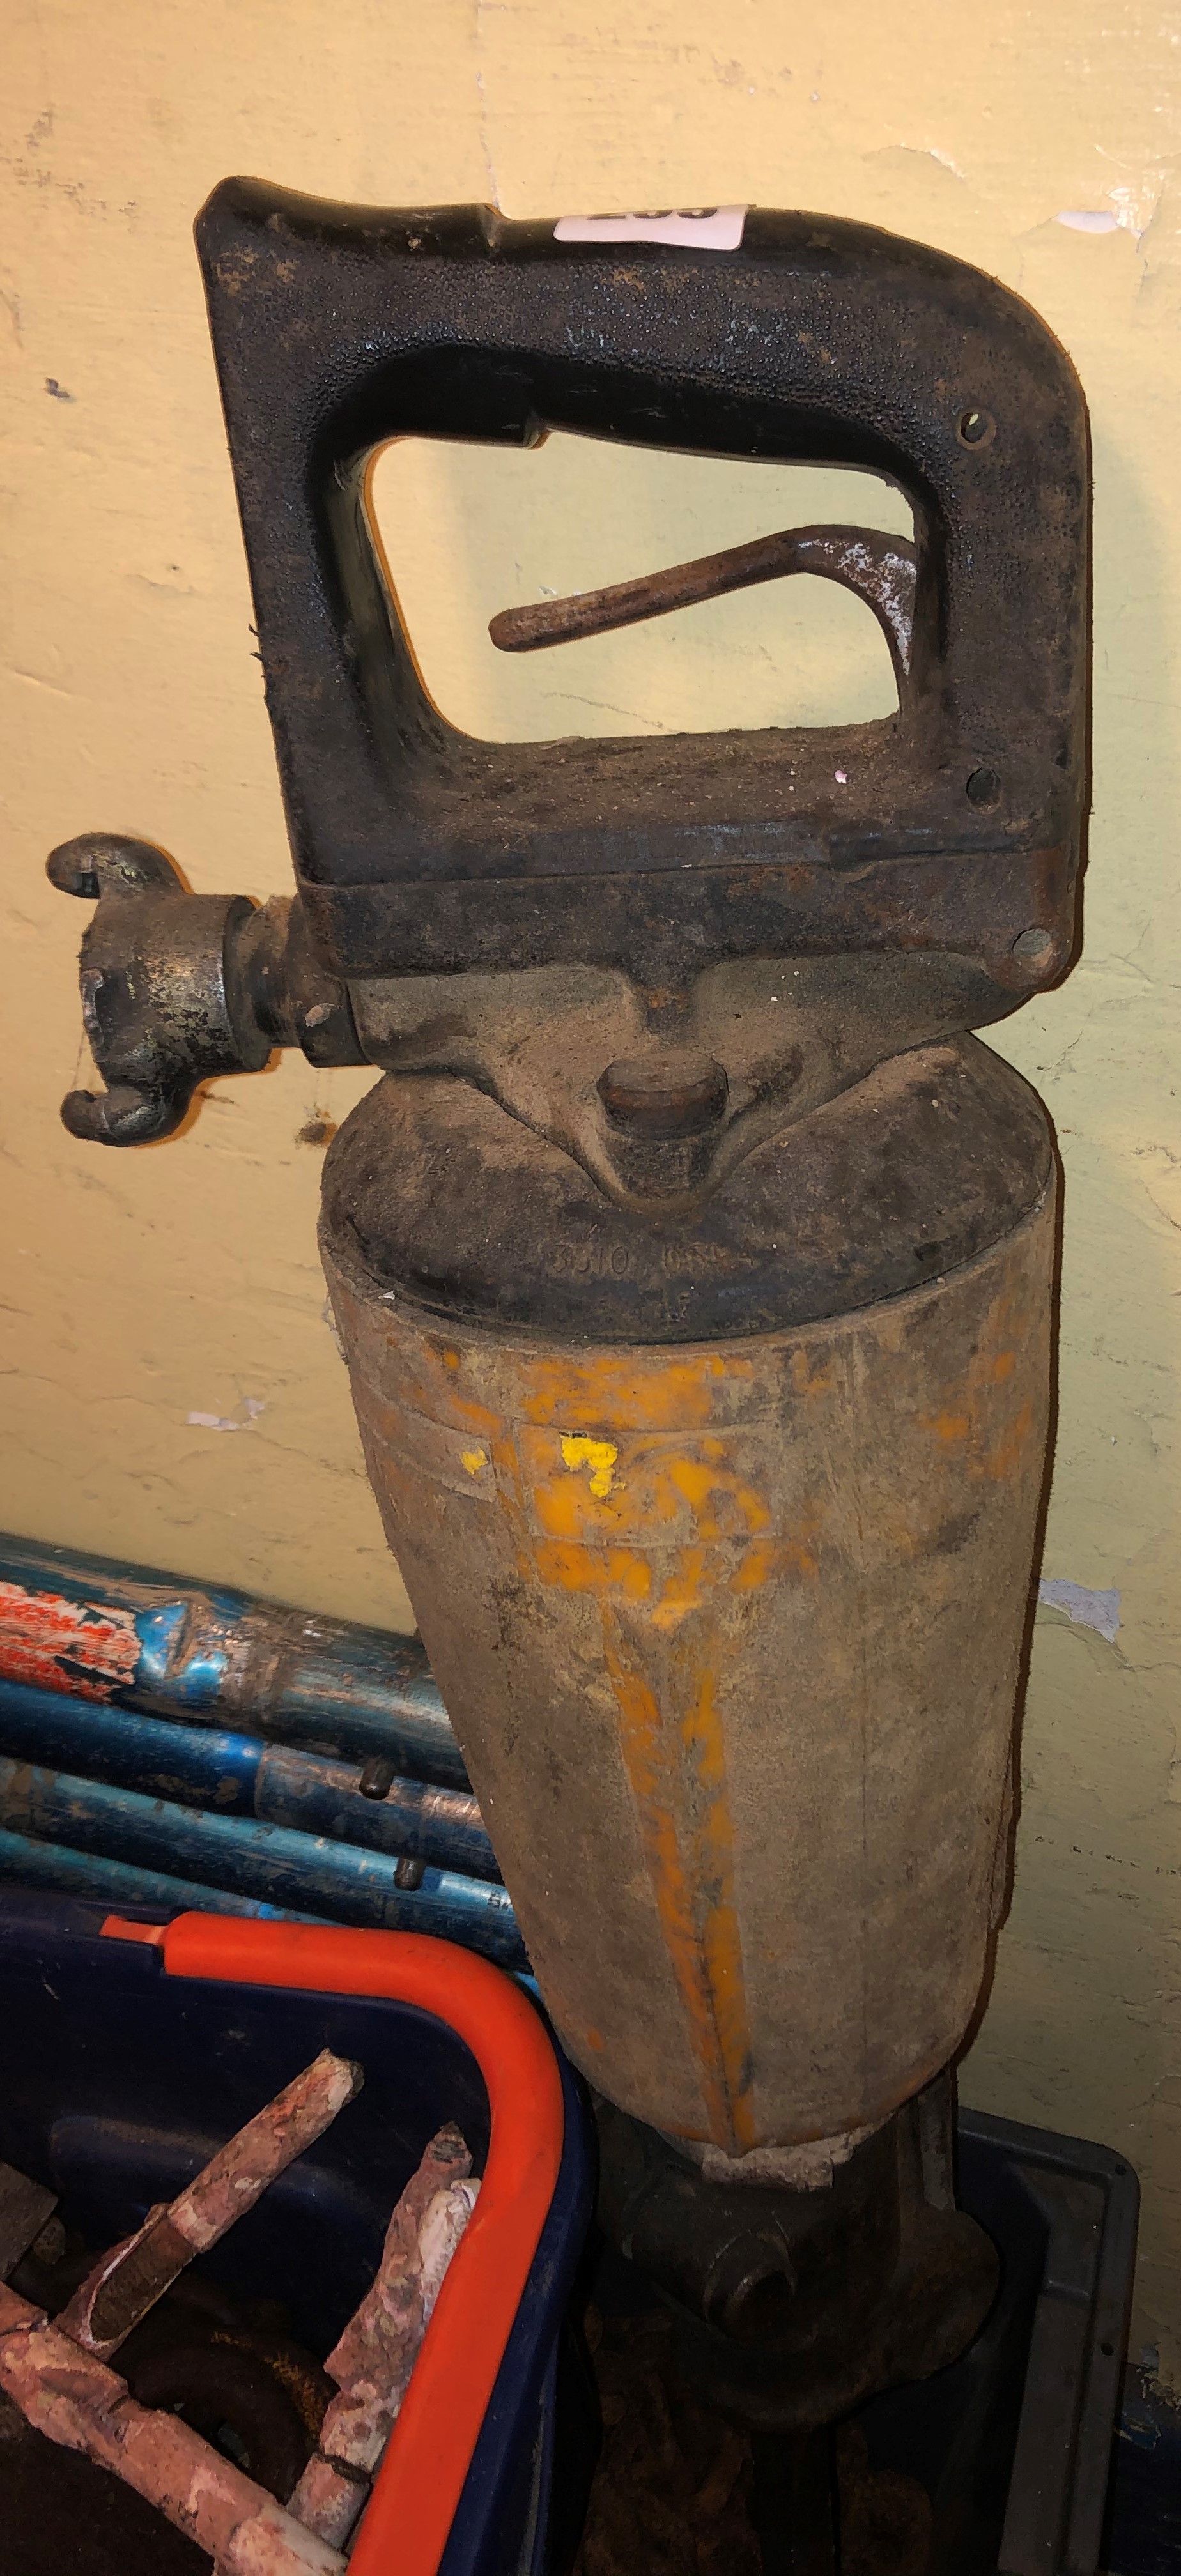 HYDRAULIC JACK HAMMER WITH A TUB OF VARIOUS BITS AND A HYDRAULIC HOSE